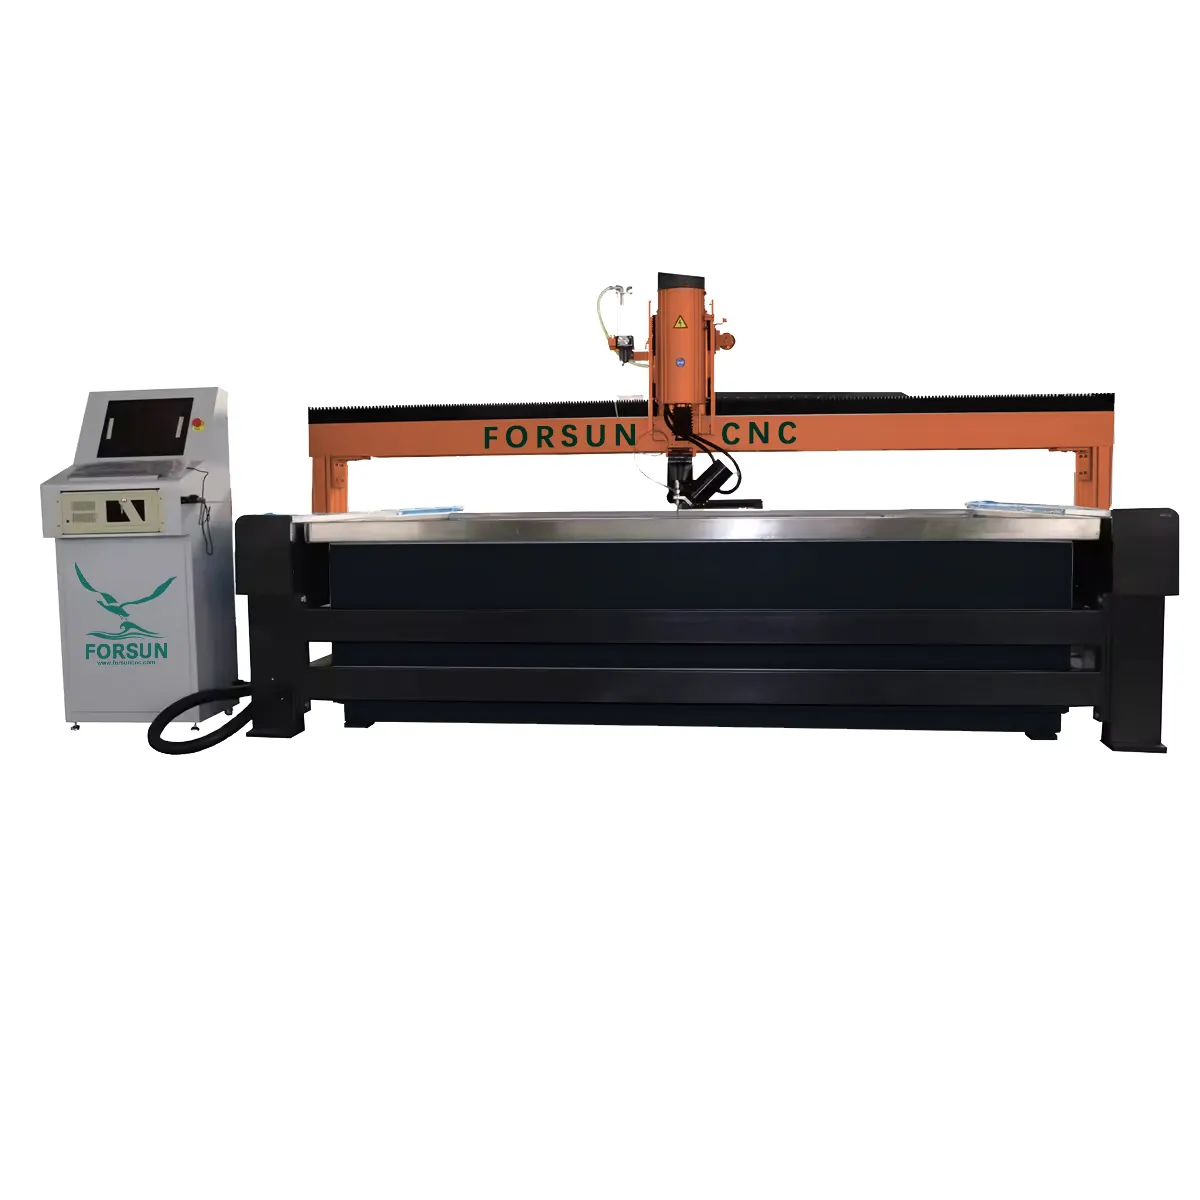 Hot sale 45% discount China waterjet cutter supplier prominent 5 axis Water jet cutting machine